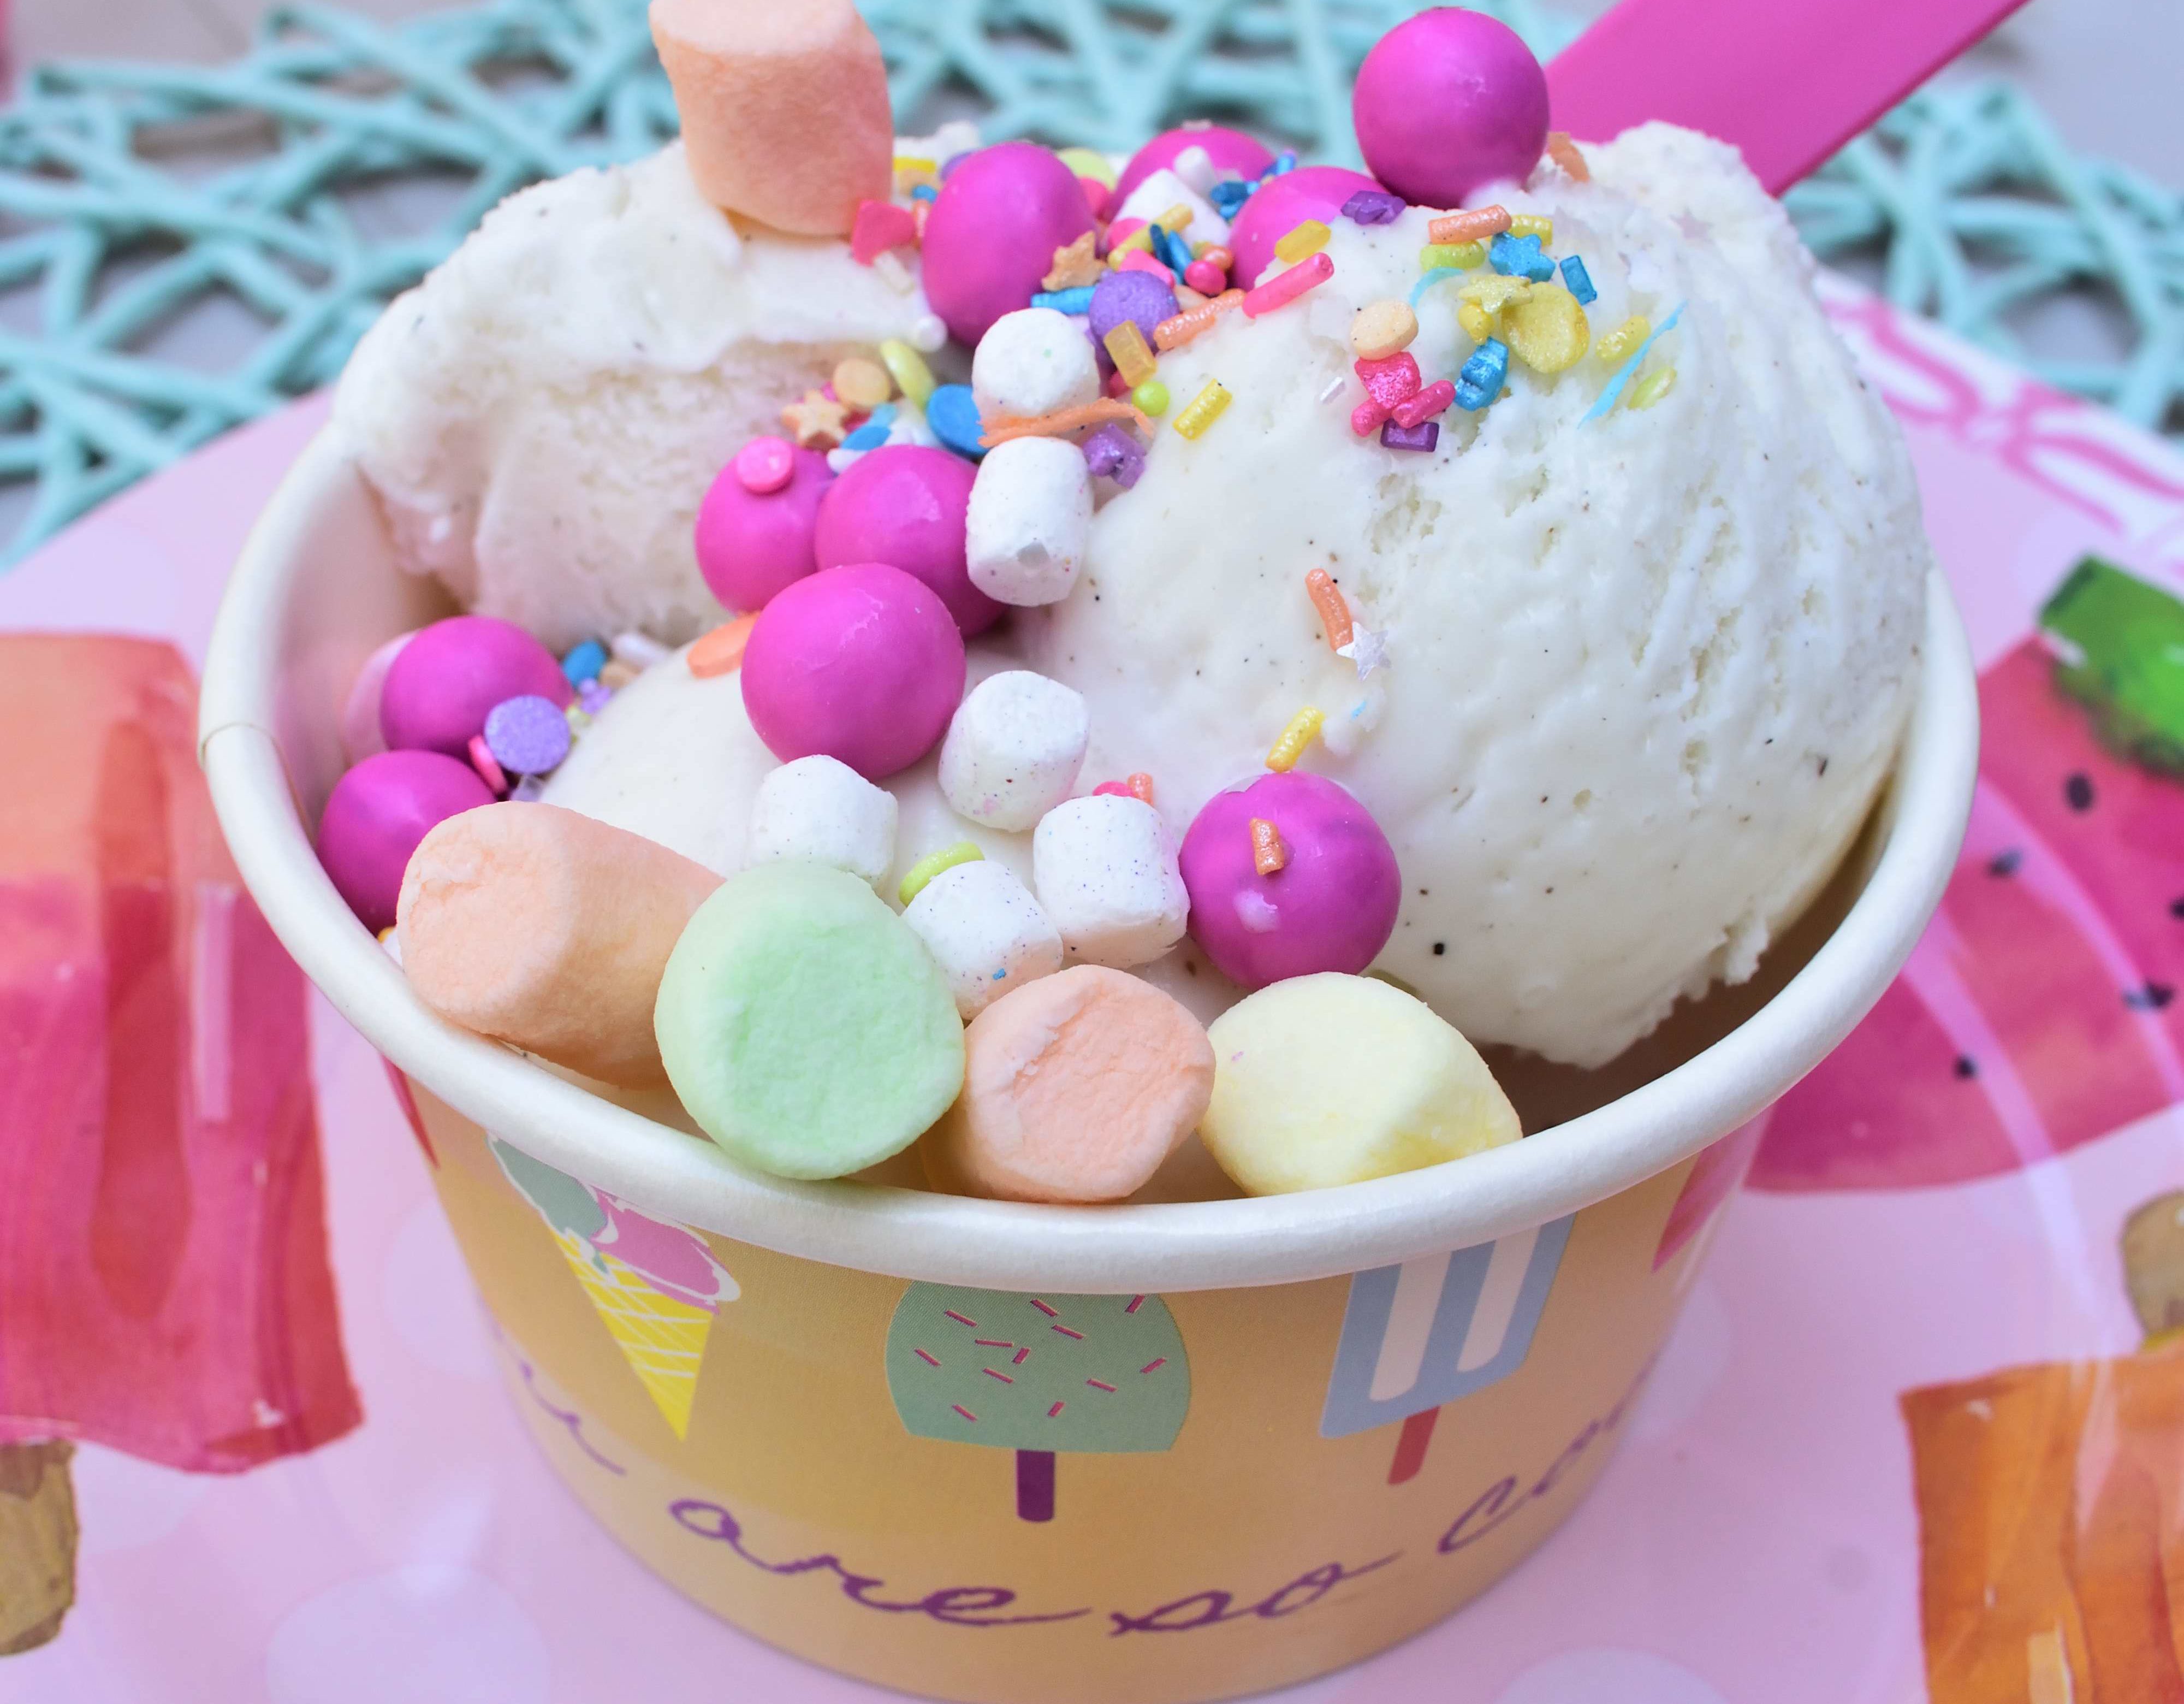 ice-cream-party-inspiration-for-a-colorful-summer-treat